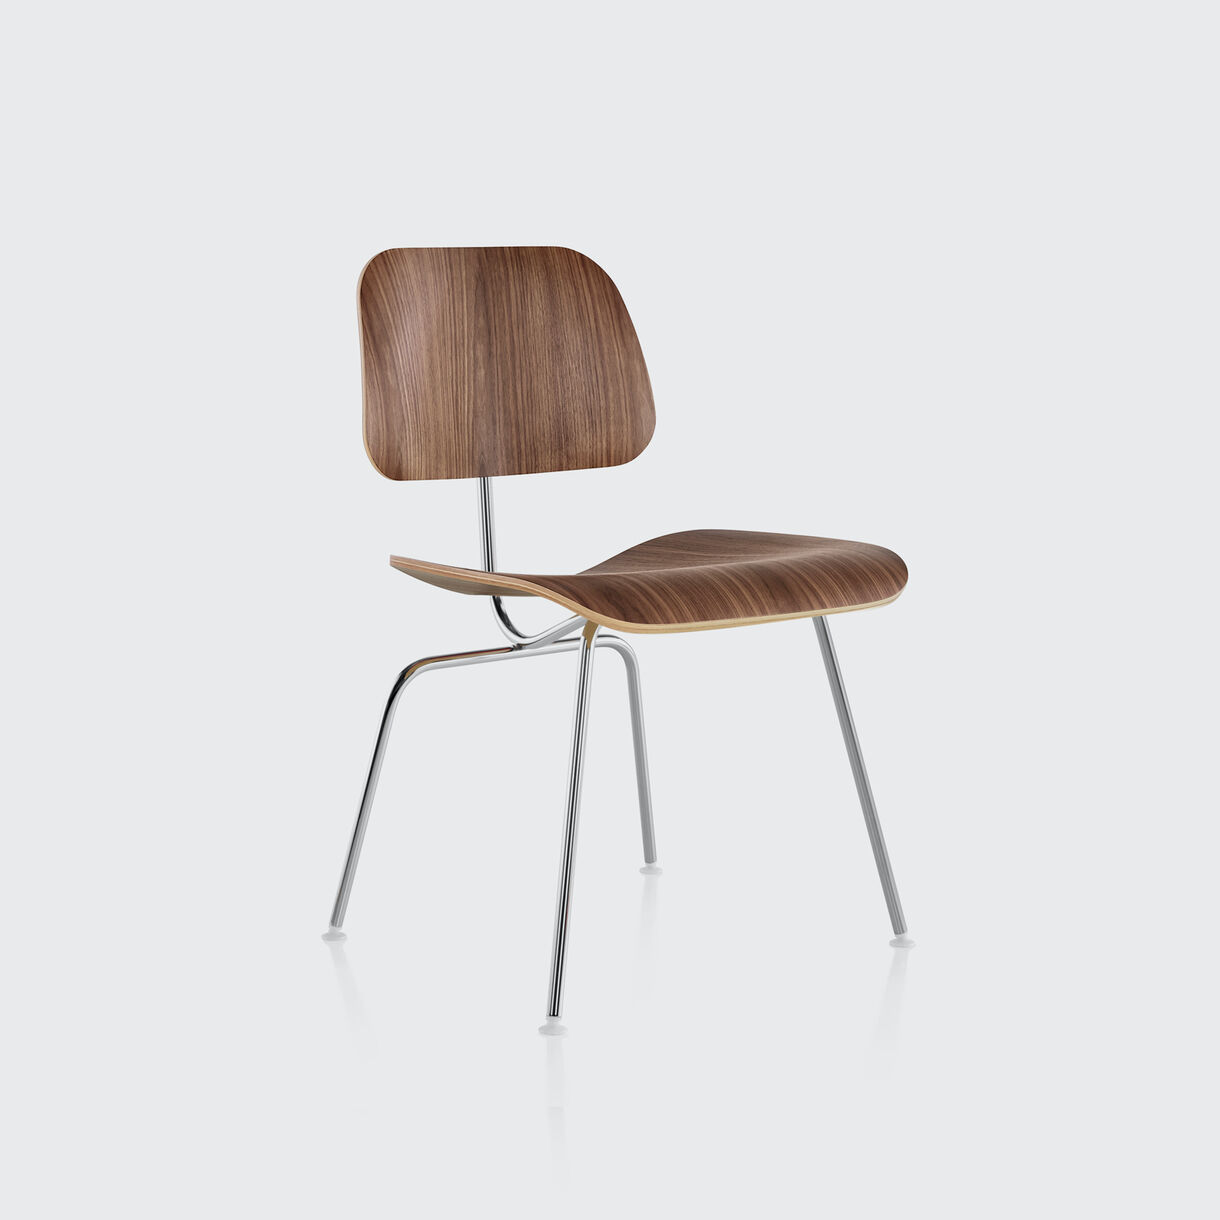 Eames Moulded Plywood Dining Chair, Walnut & Chrome